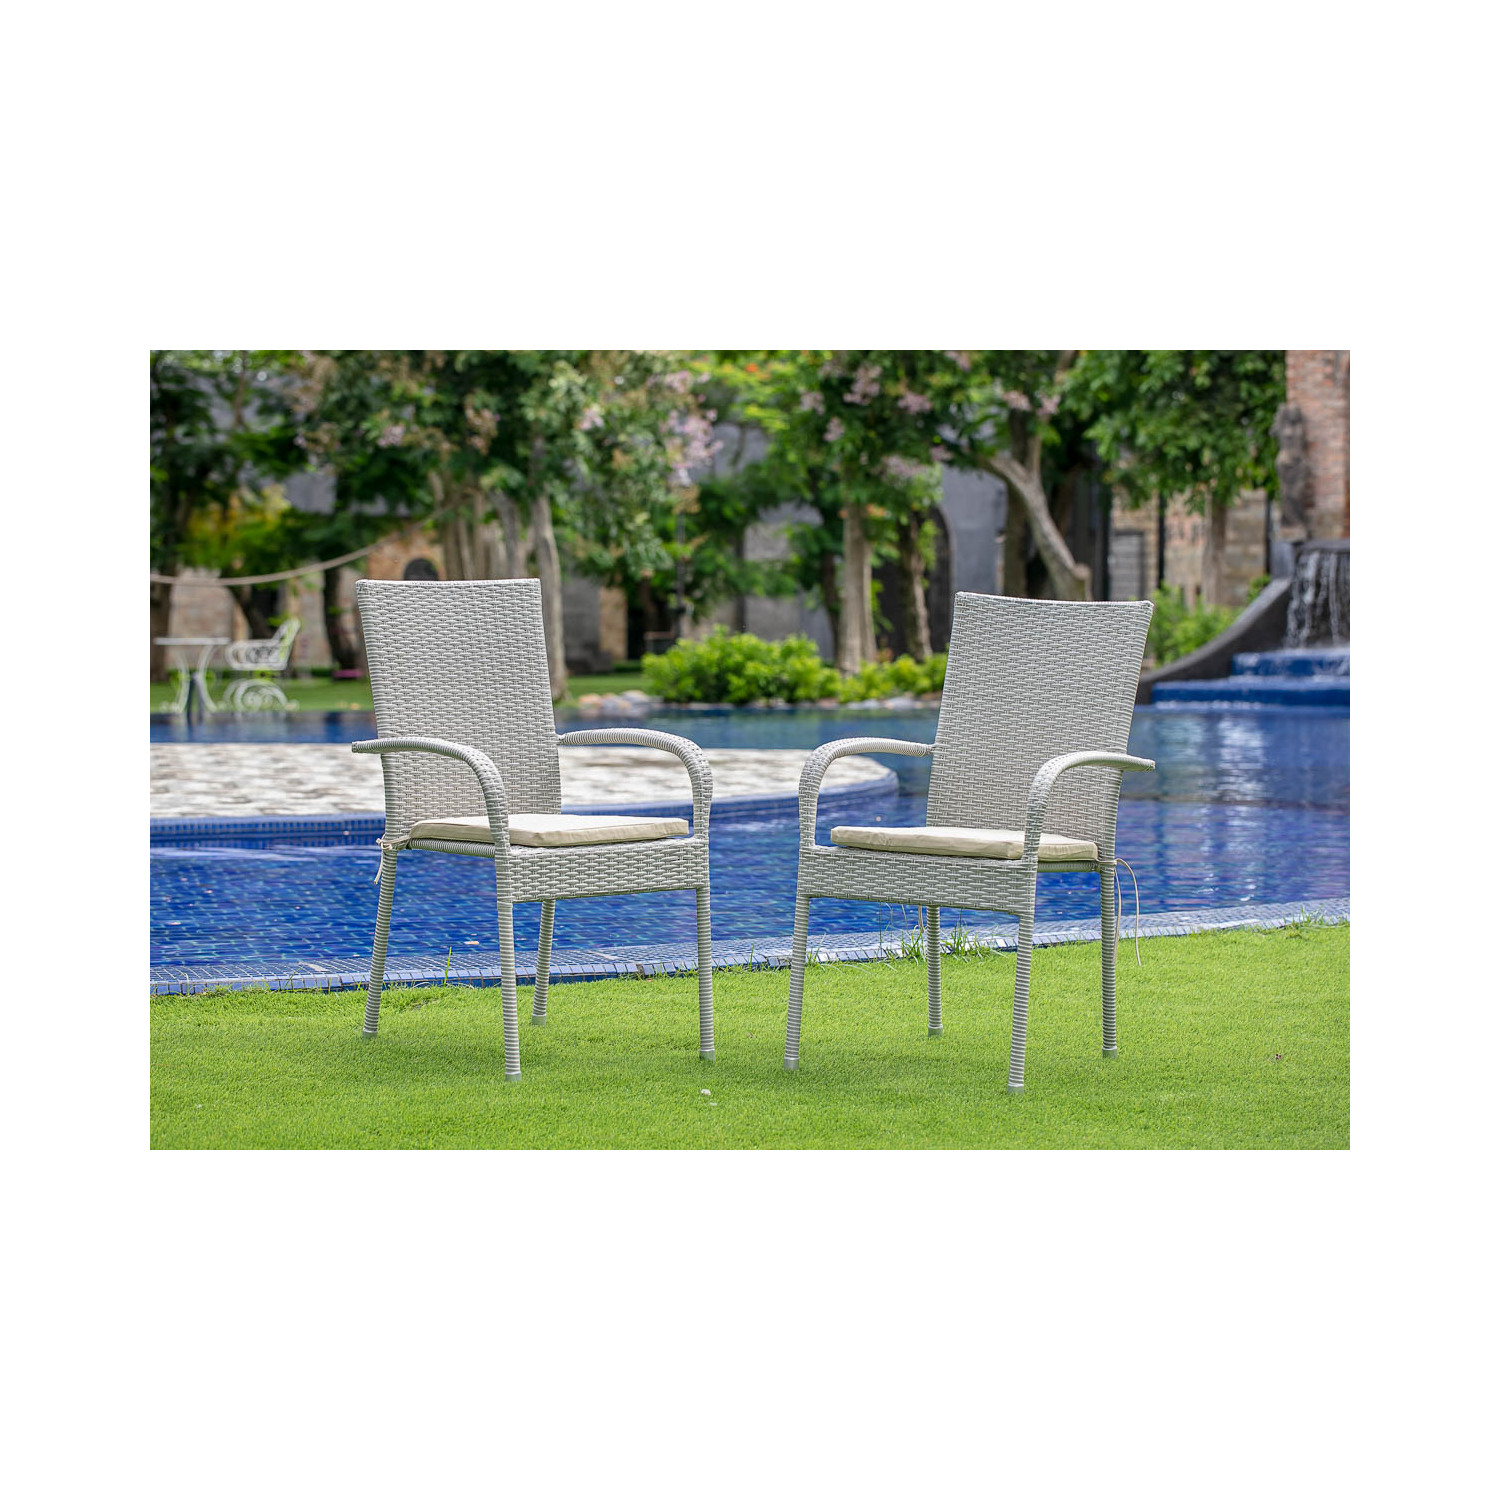 East West Furniture Gudhjem Metal Patio Dining Chairs in Natural (Set of 2) - image 1 of 3